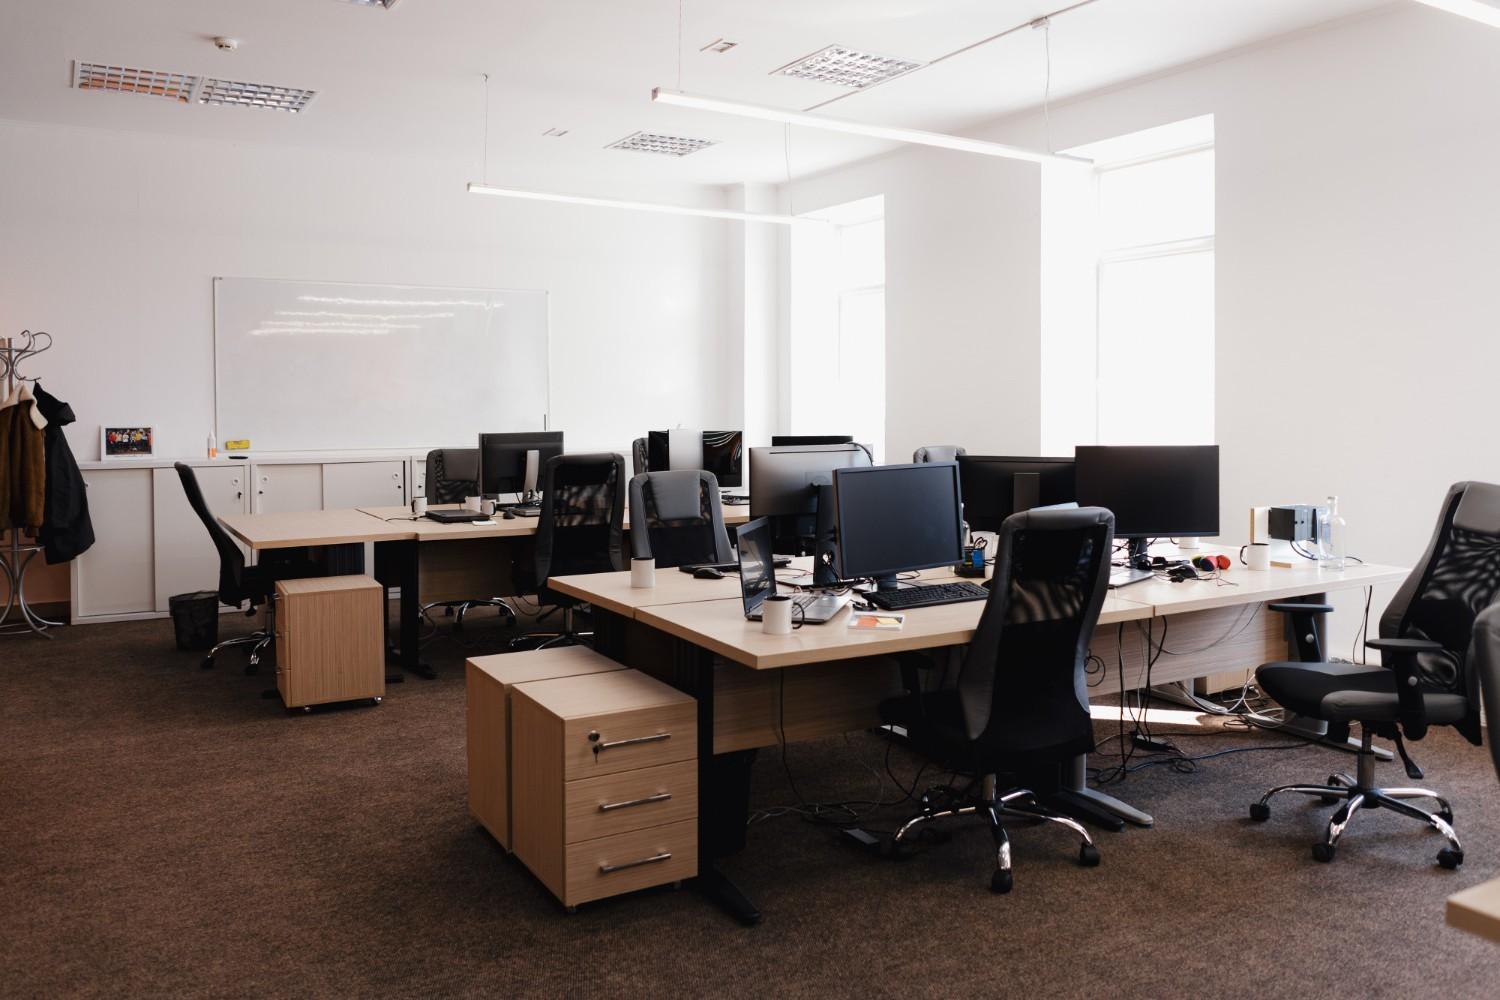 Product Moving Offices? Let Our Office Relocation Tech Support Services Do All The Work! - IT Support Services Toronto, North York, Richmond Hill, Mississauga, Oakville, Markham image